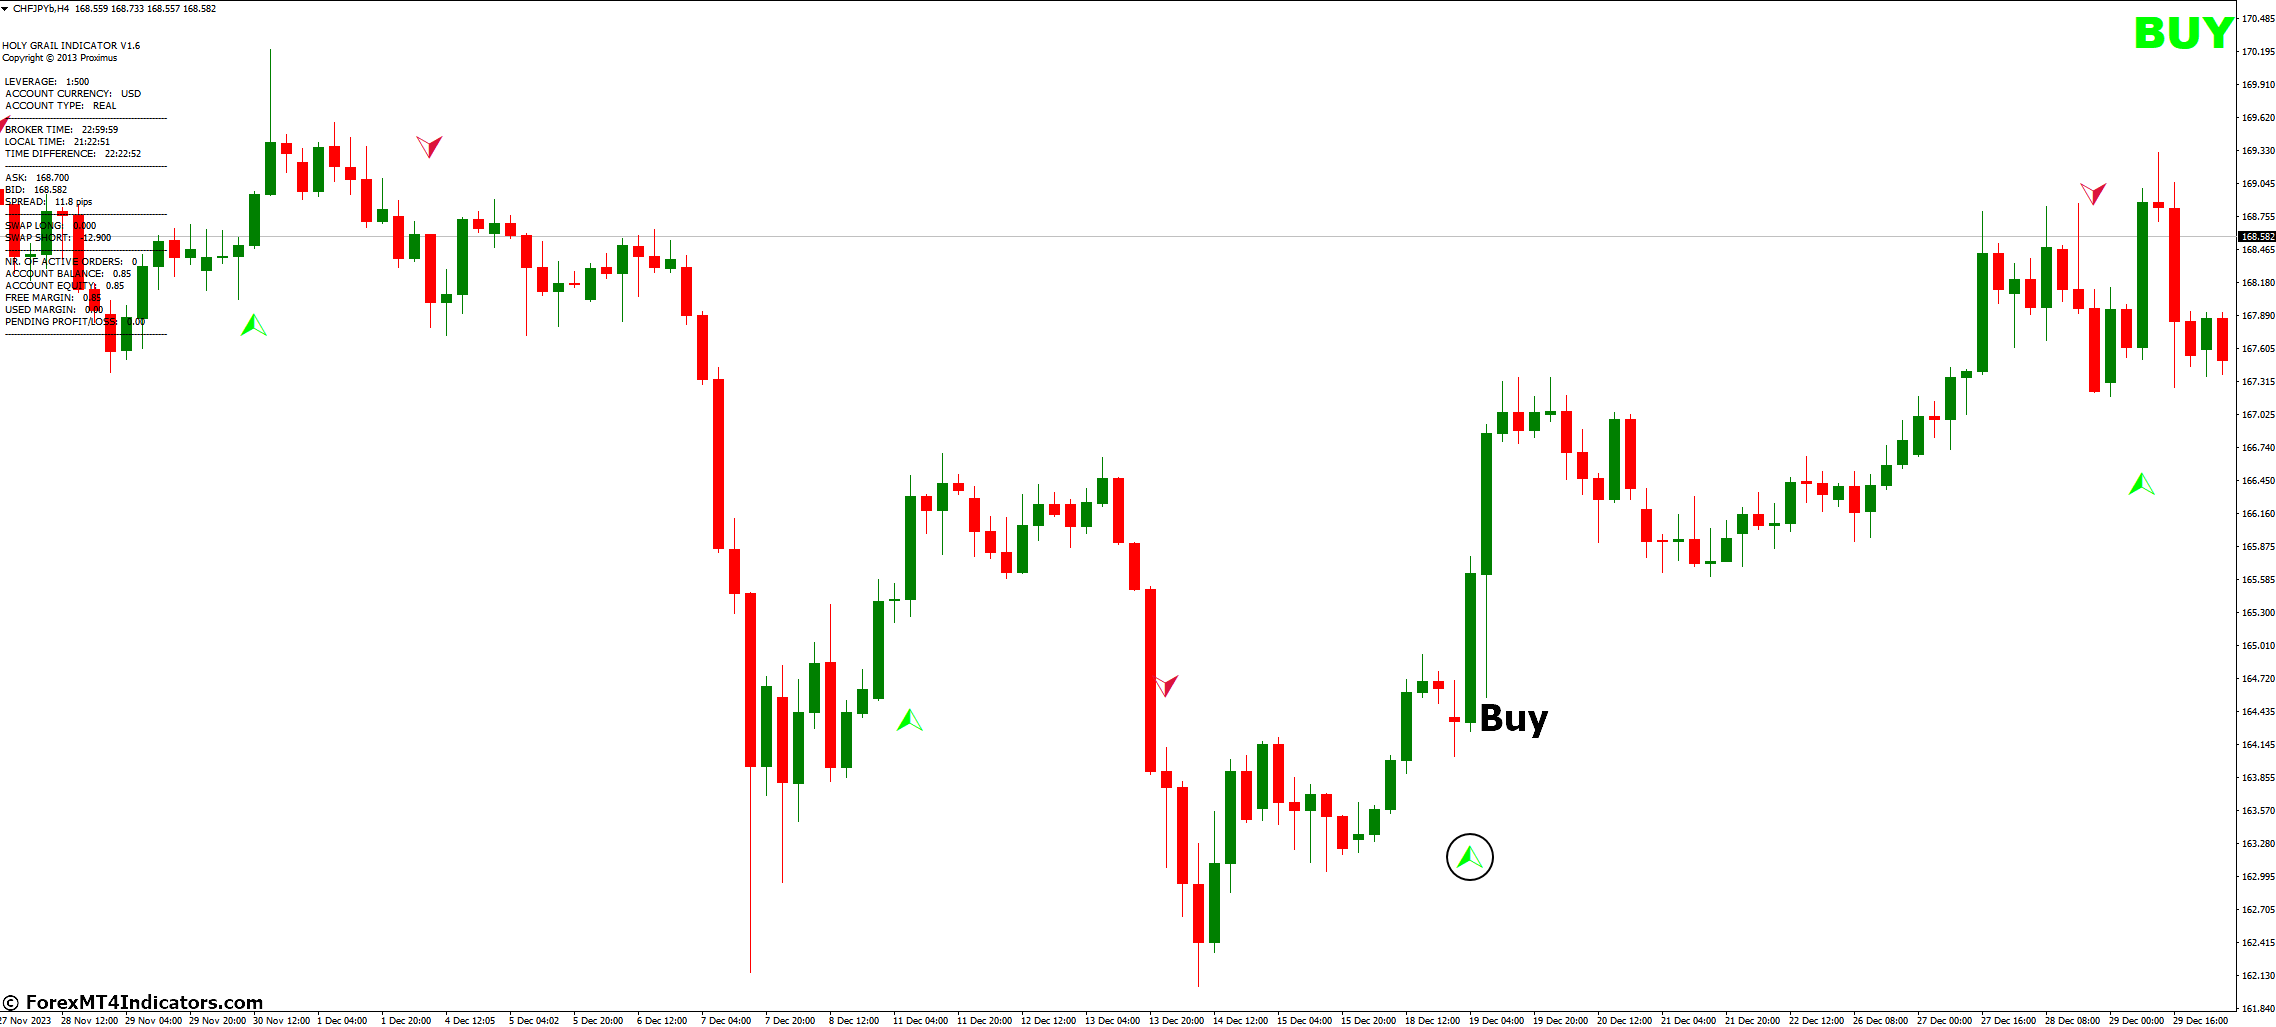 How to Trade with Holy Grail 1.6 Indicator - Buy Entry